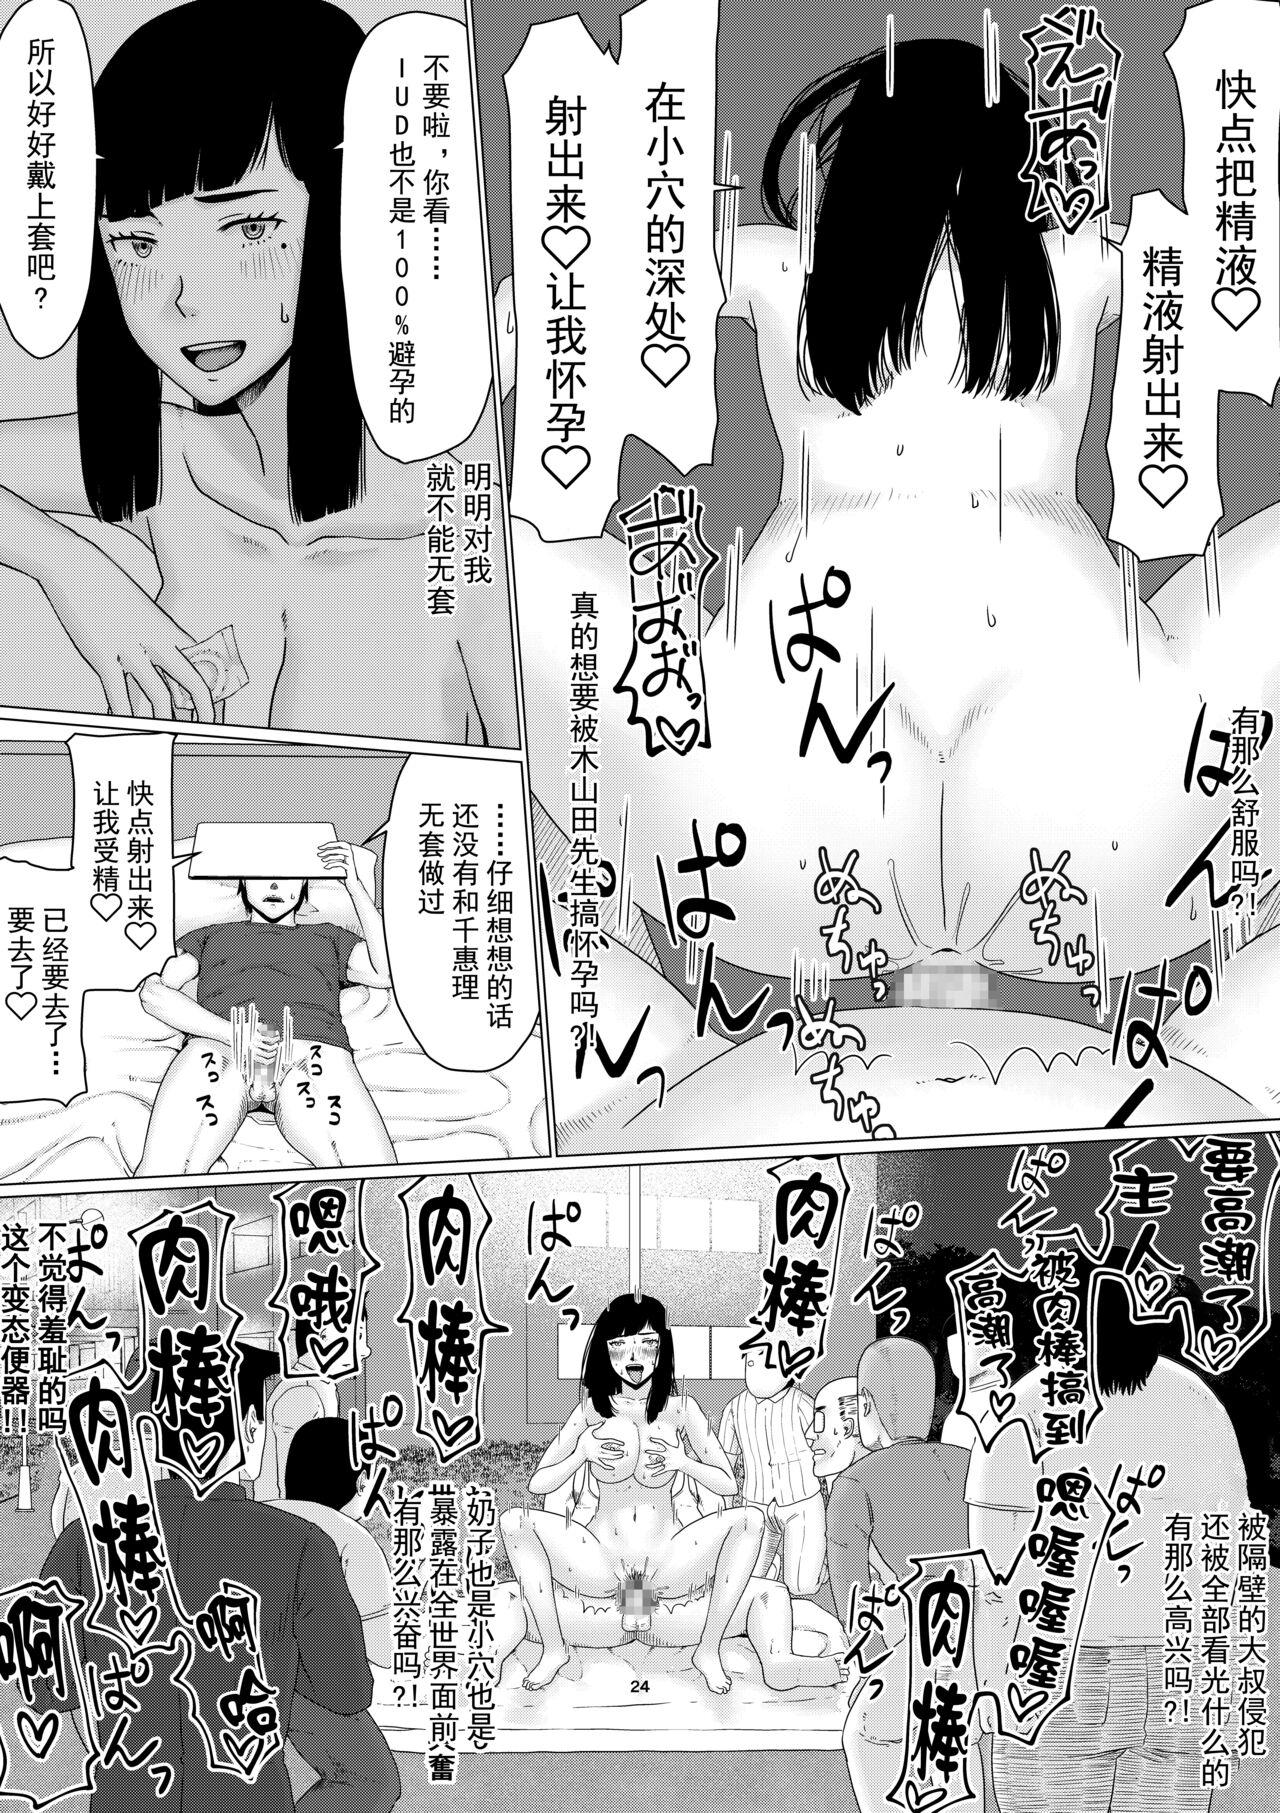 (Dōjinshi) Chieri can't lose!3 -Perverted toilet wife who fertilizes anyone's sperm with her husband's approval- Volume 1 (Original) [Chinese][超勇漢化組] 24